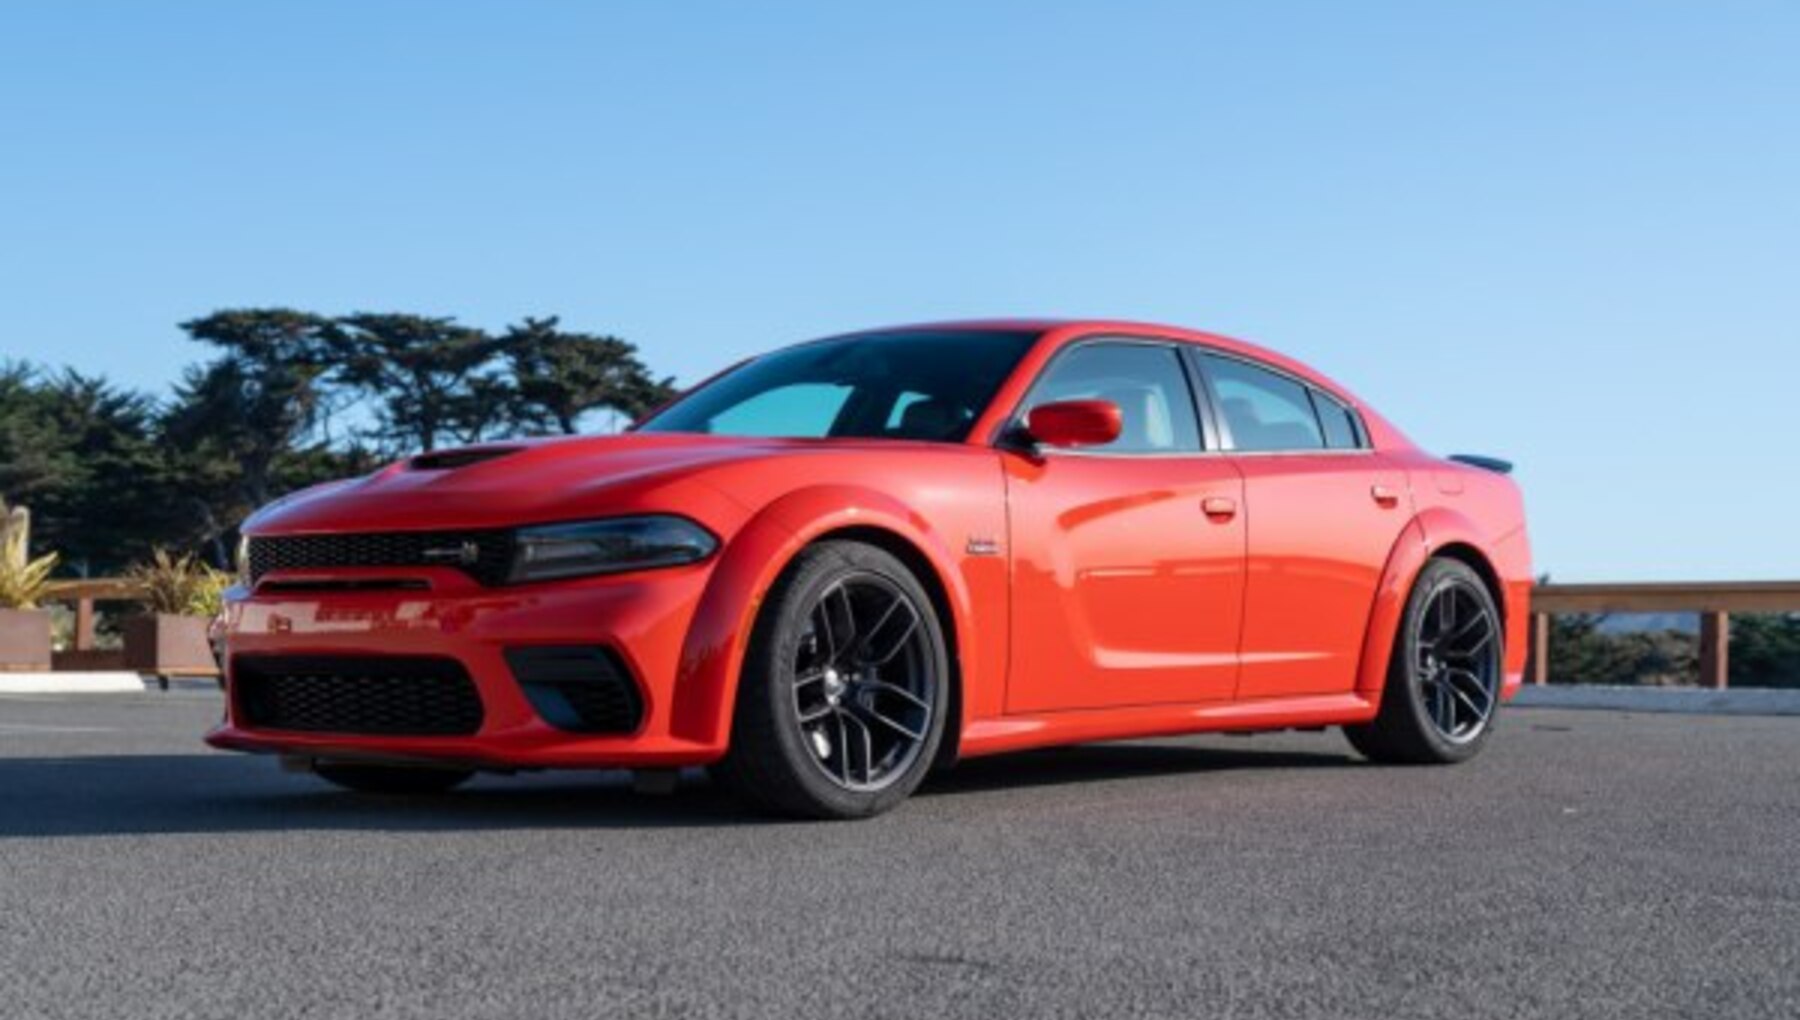 Dodge Charger VII (LD; facelift 2019) GT 3.6 V6 (300 Hp) Automatic 2019, 2020, 2021 